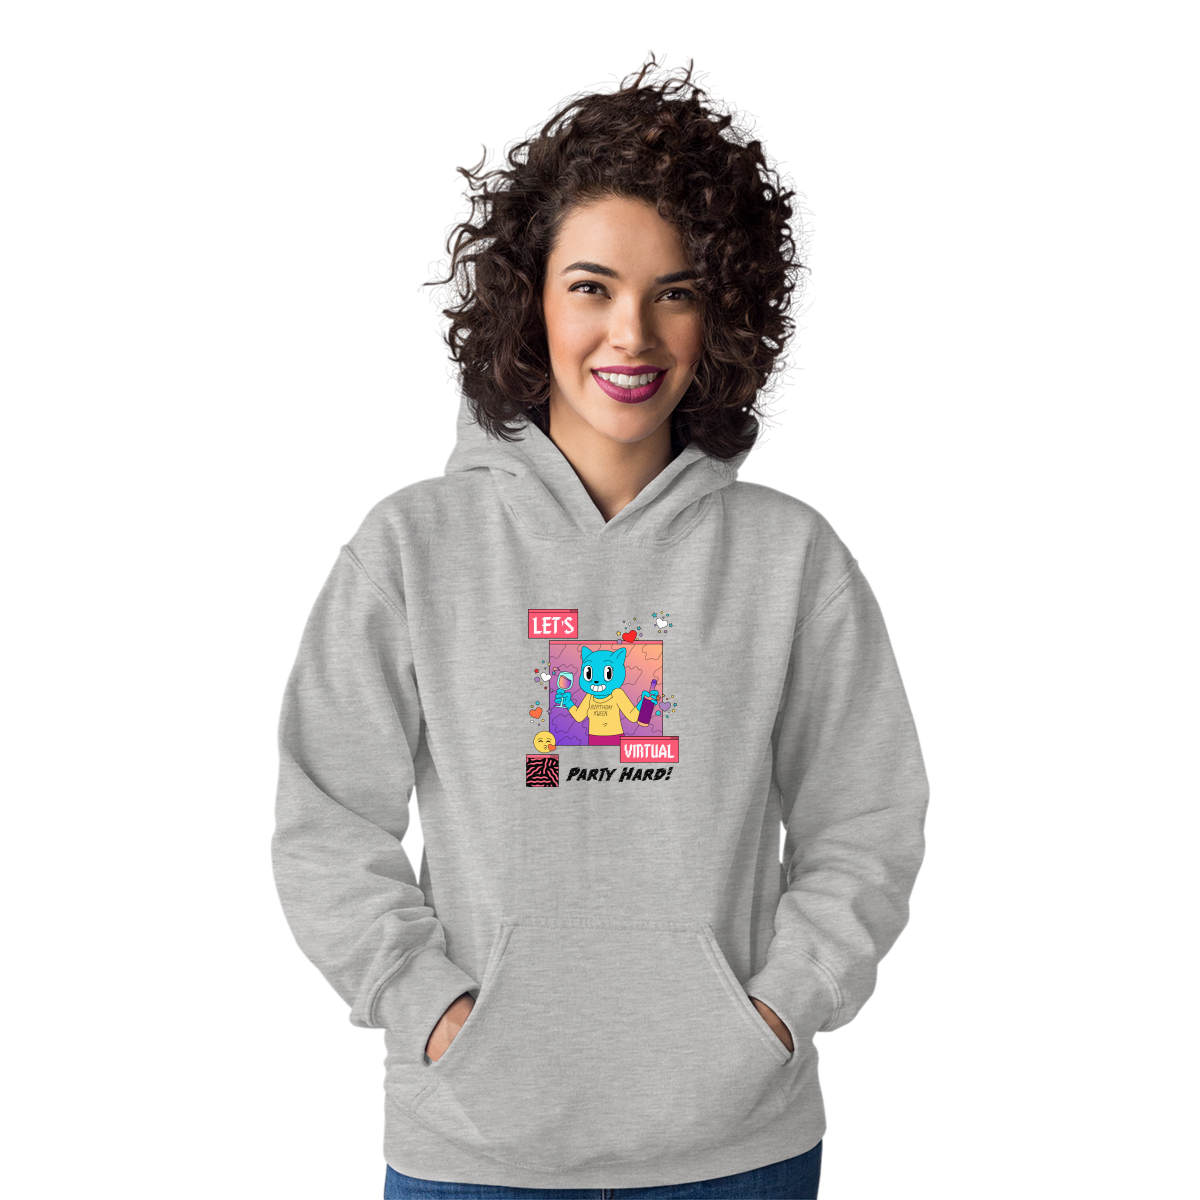 Let's Virtual Party Hard Unisex Hoodie | Gray